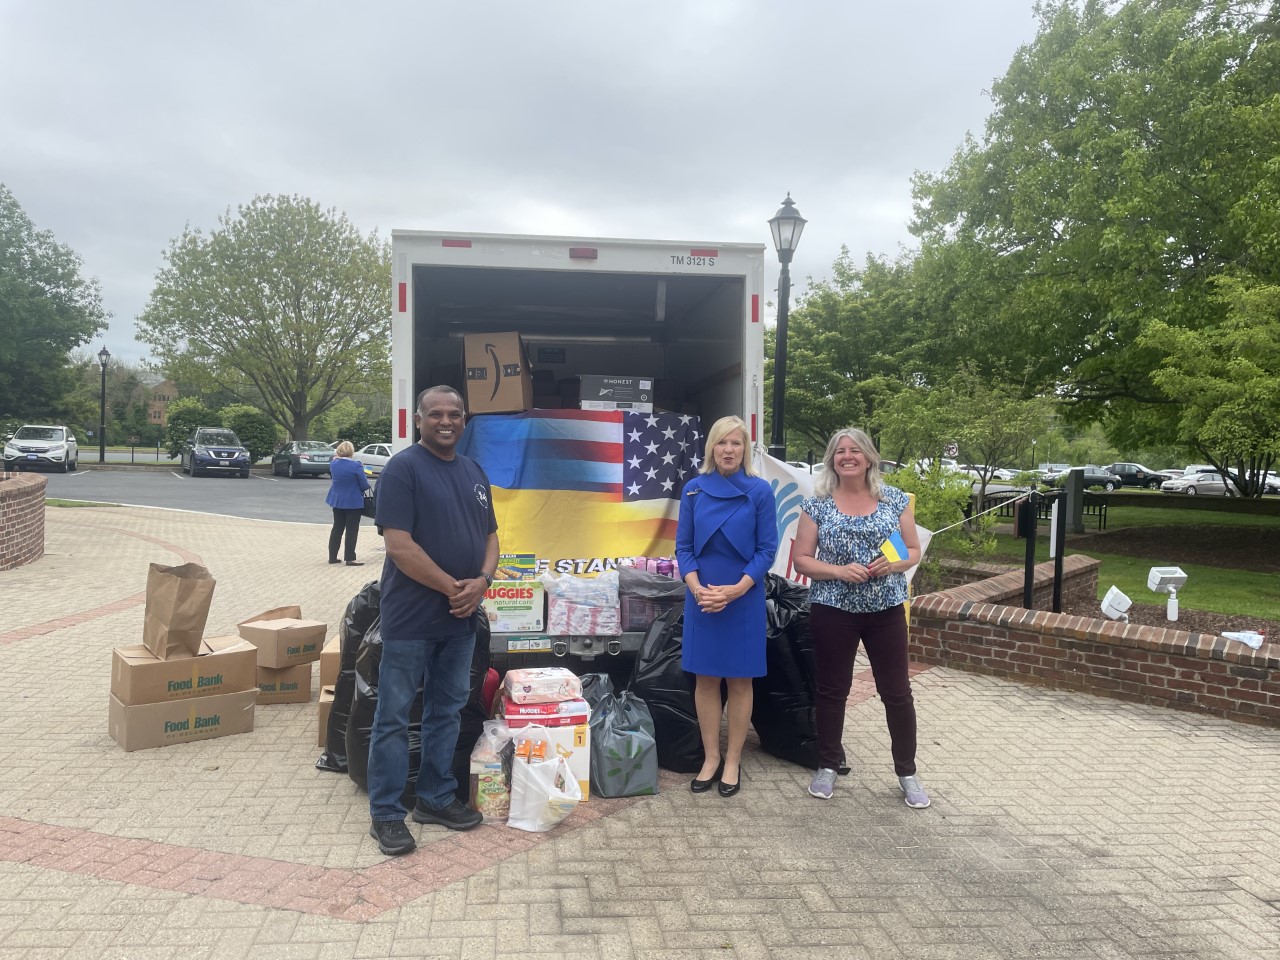 Lt. Governor Bethany Hall-Long, Members of the General Assembly, Donate Delaware, PAM Health, Charity Crossing, and the Delaware Council on Faith Based Leadership Collect Essential Supplies to aid Ukraine | WITN Channel 22 Wilmington, Delaware